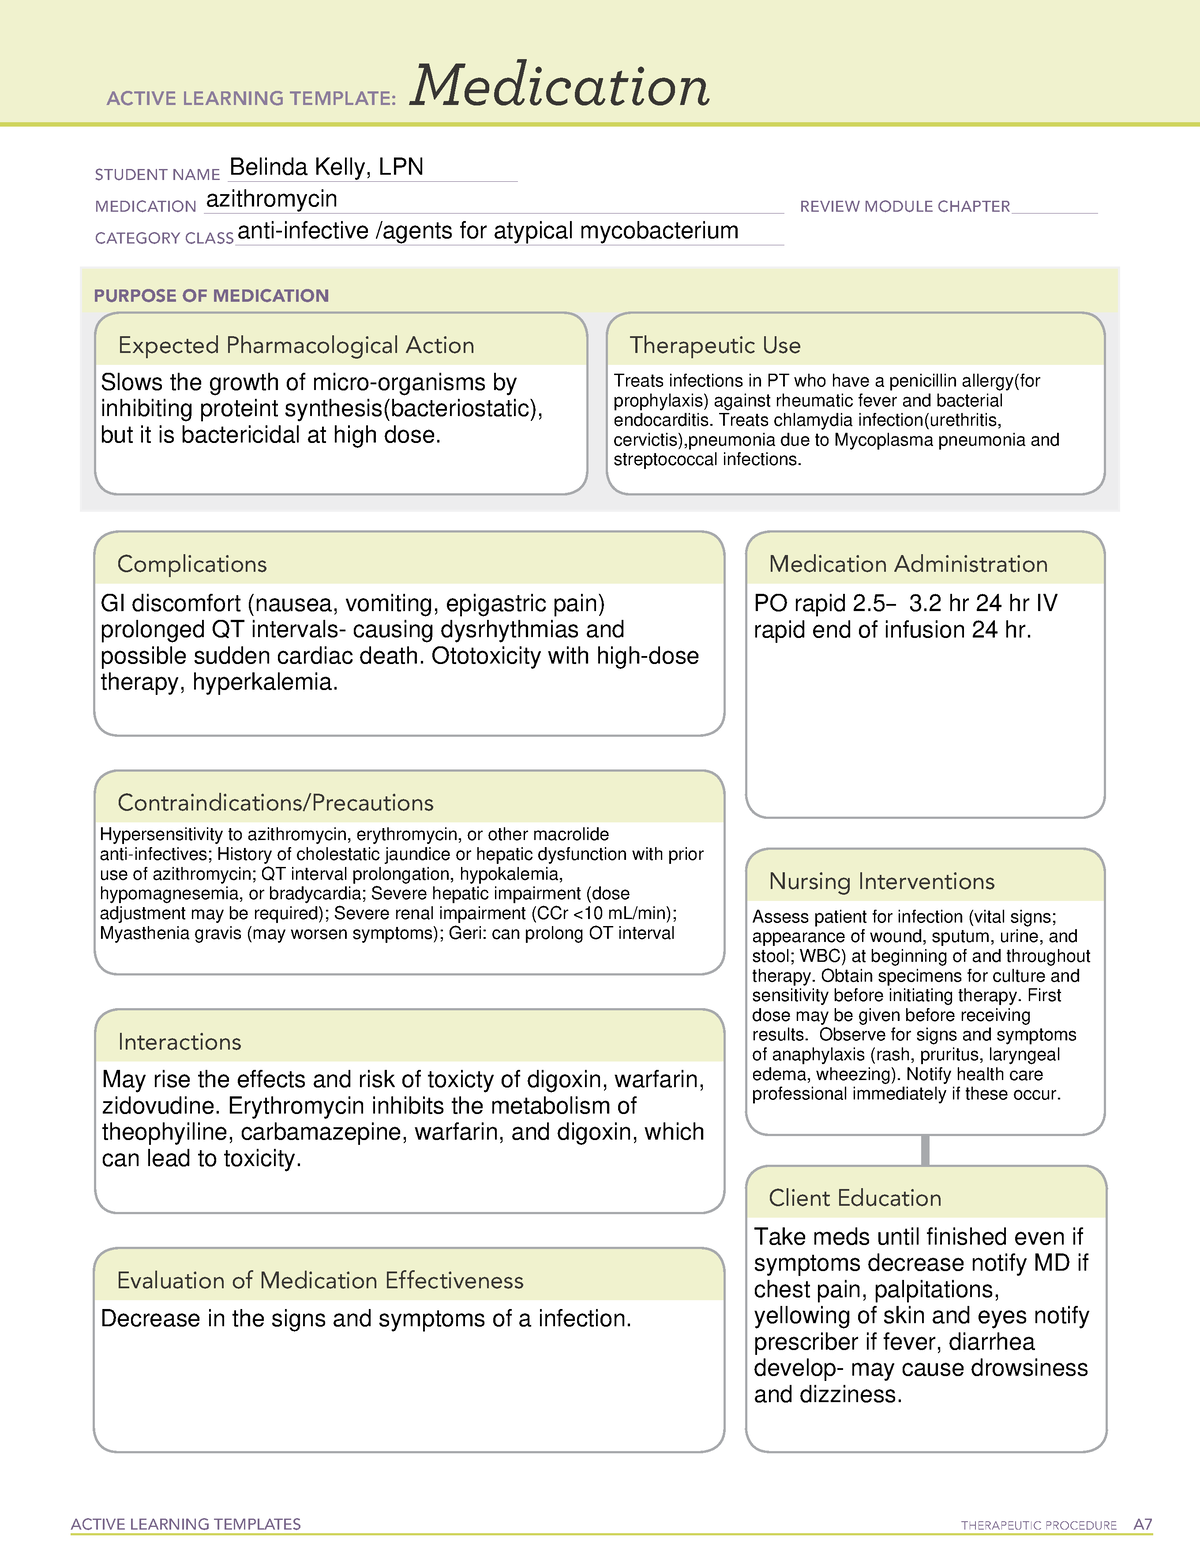 Azithromycin medication template CF ACTIVE LEARNING TEMPLATES